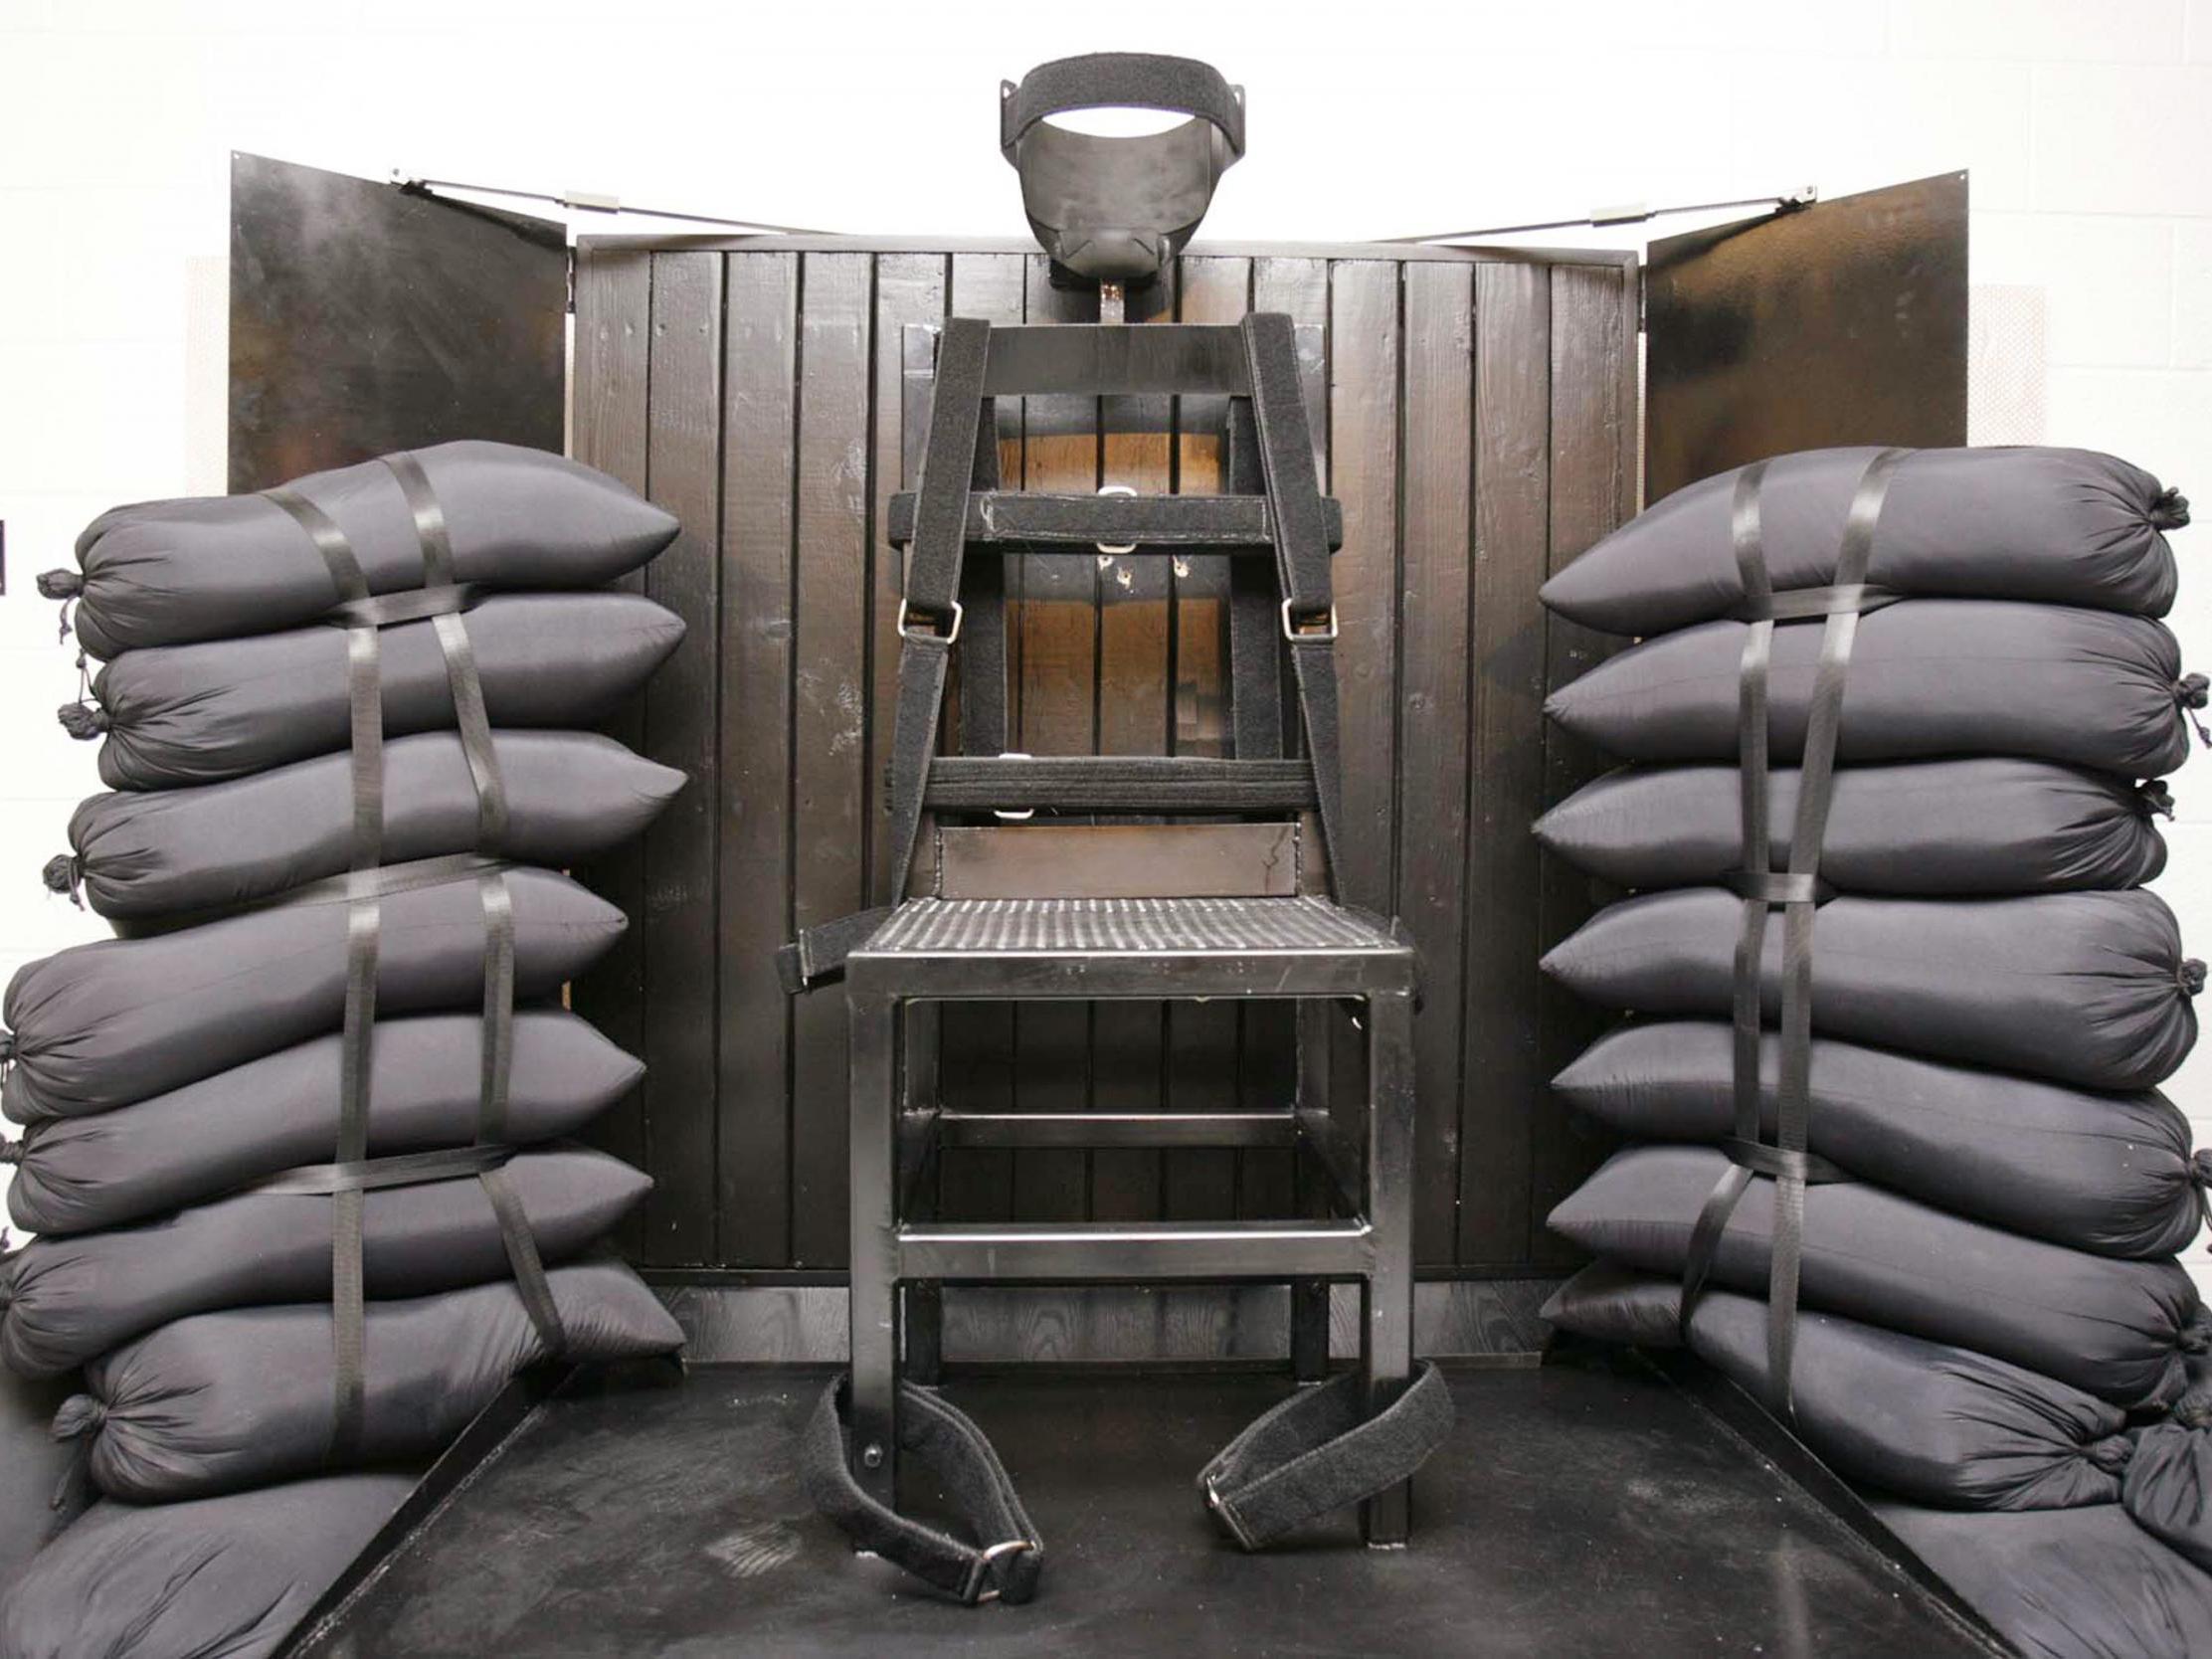 The execution chamber at the Utah State Prison is seen after Ronnie Lee Gardner was executed by a firing squad in June 2010